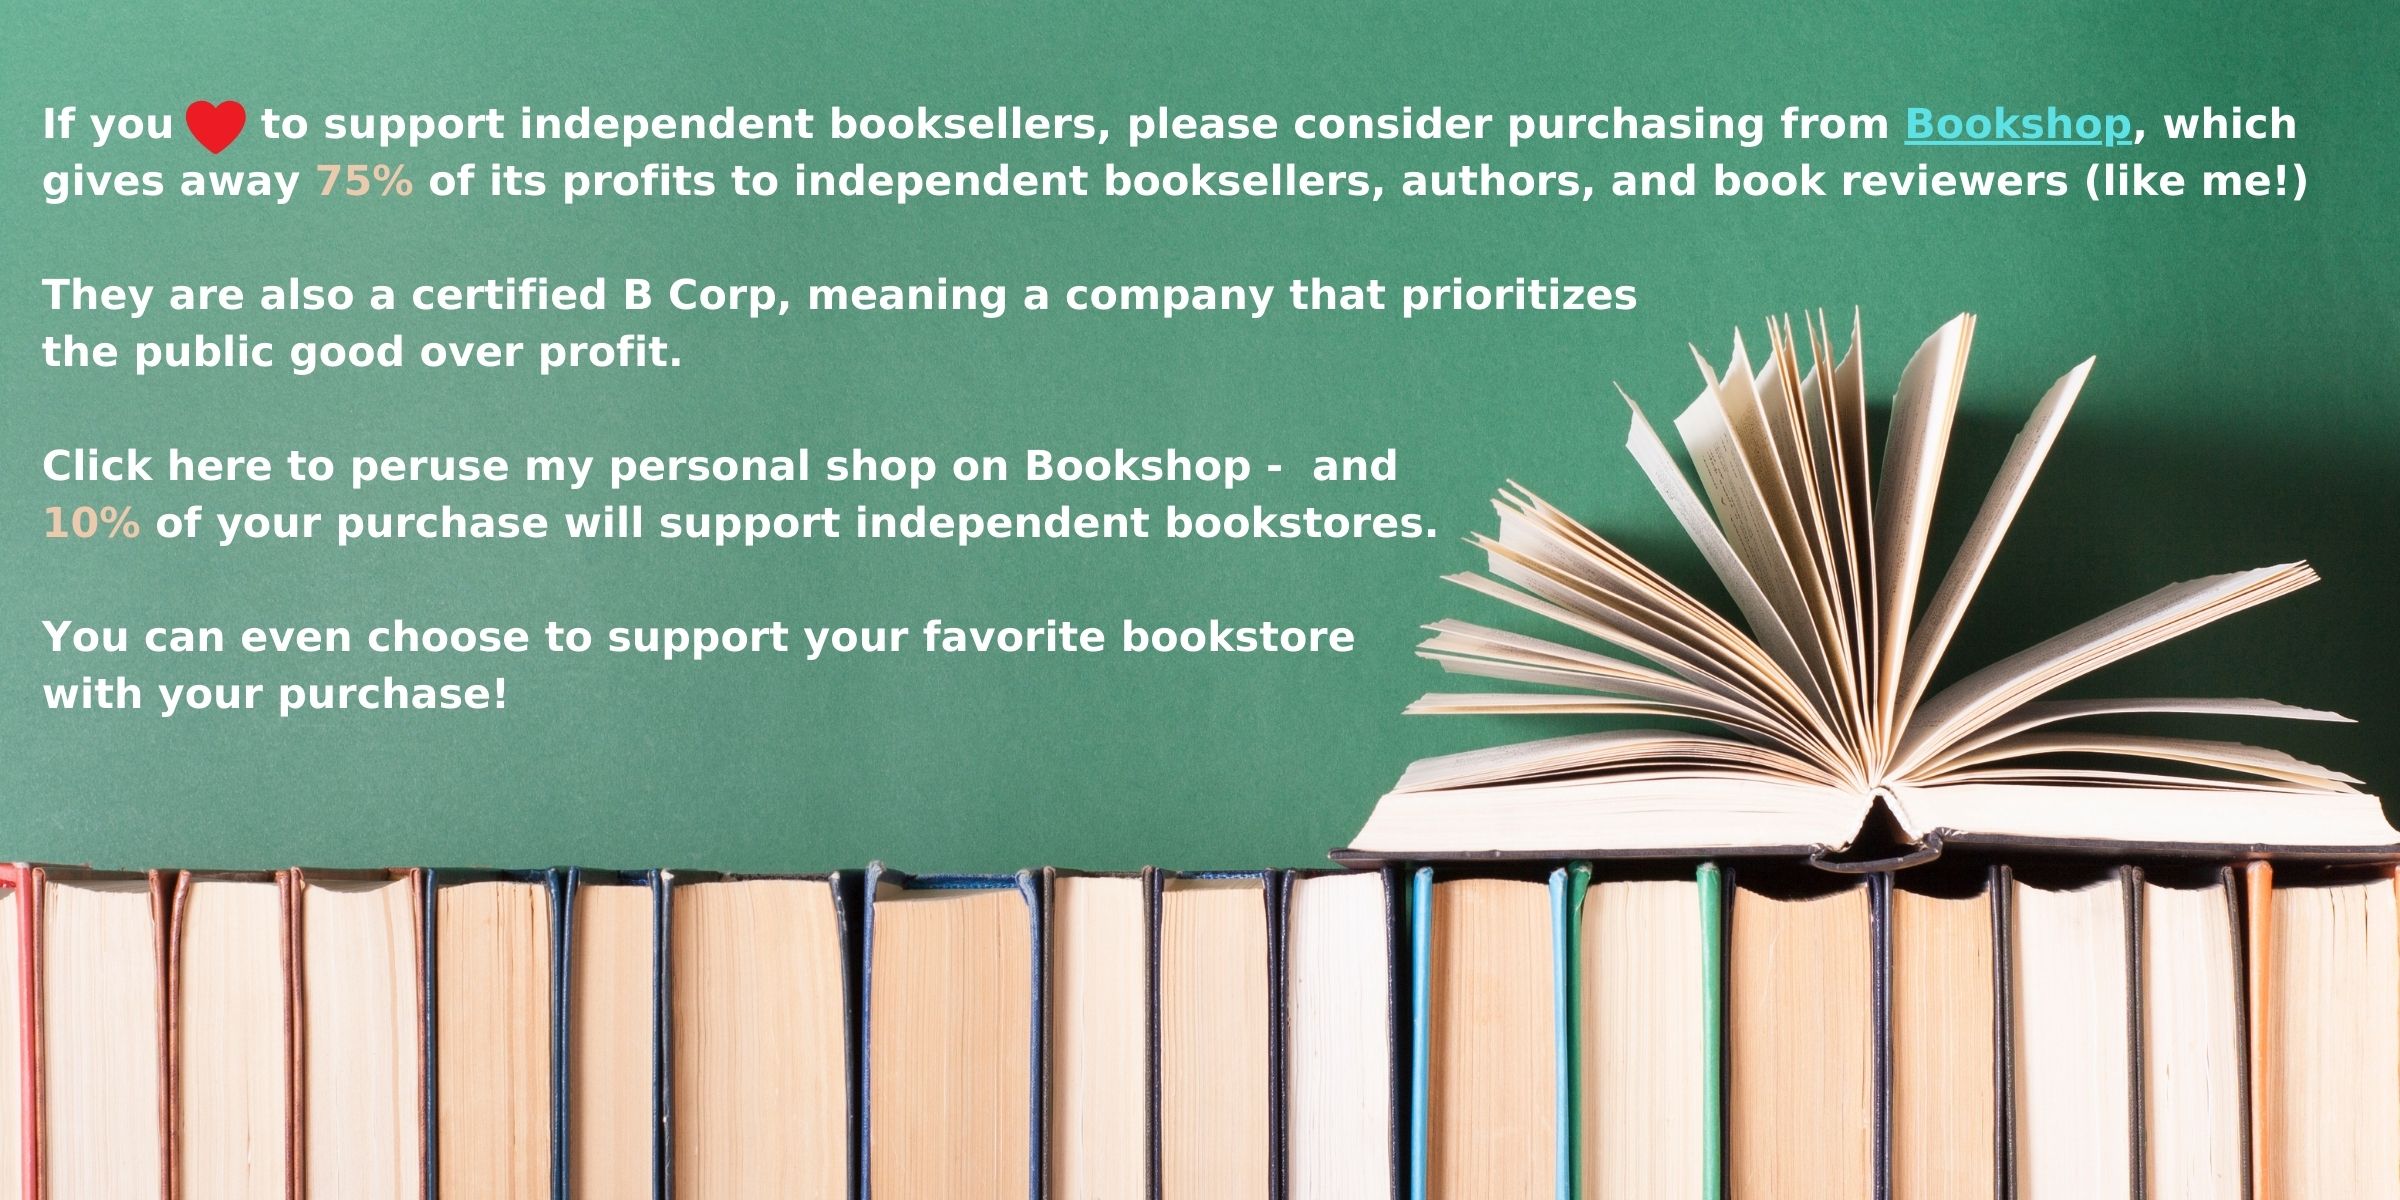 Project to Support Independent Booksellers